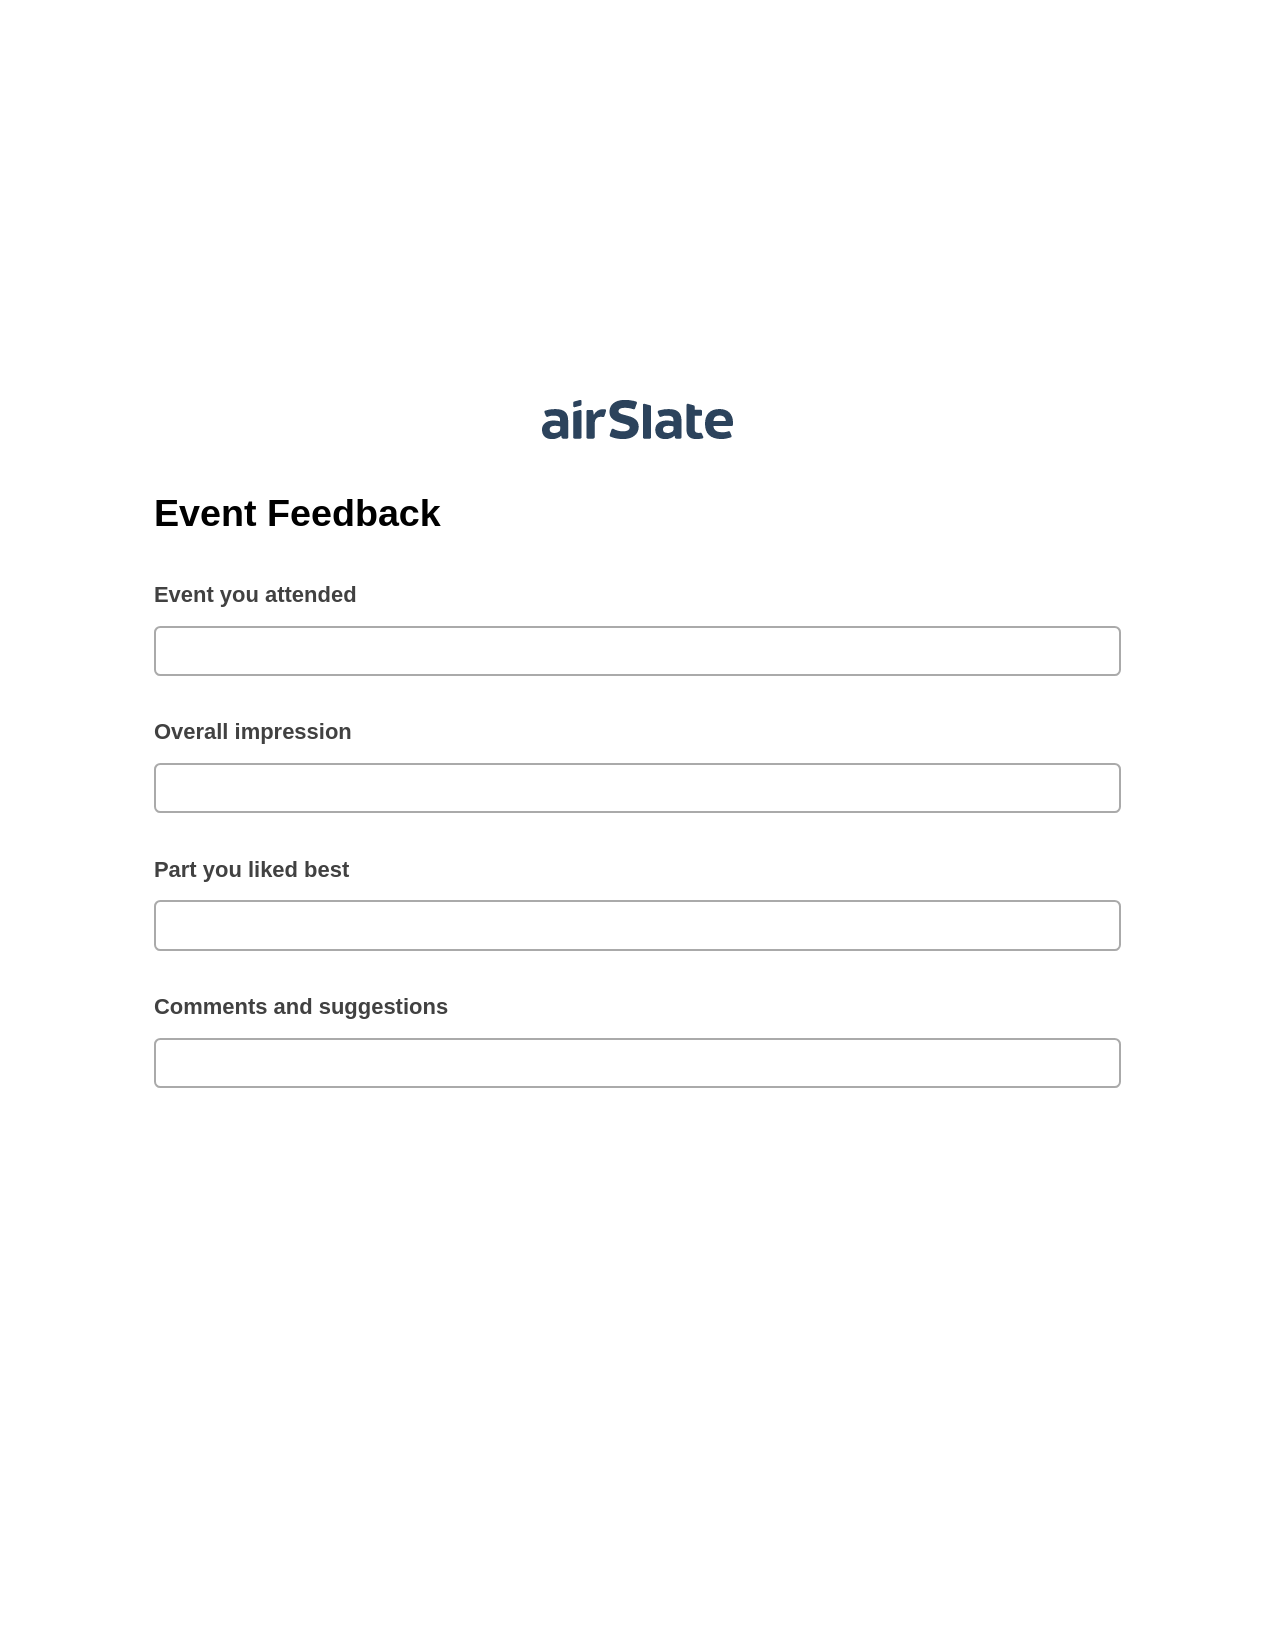 Event Feedback Pre-fill Dropdown from Airtable, Update NetSuite Records Bot, Export to MySQL Bot